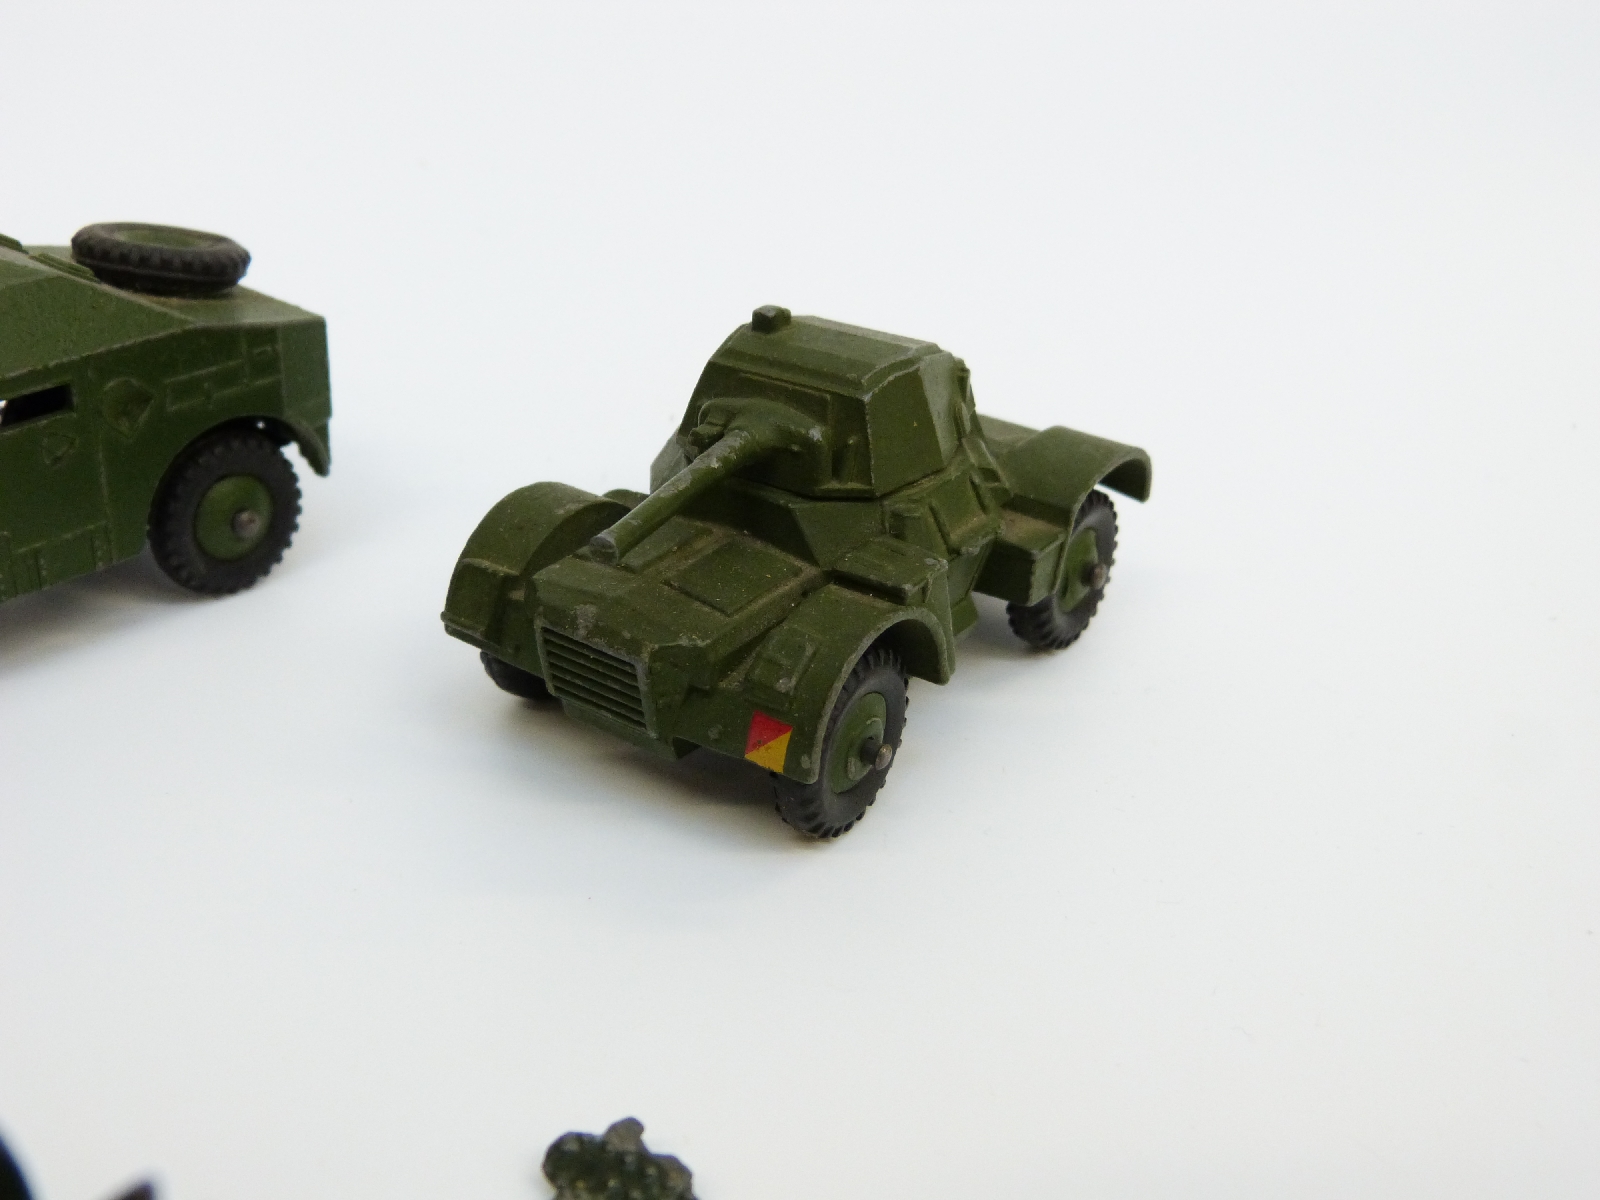 Ten Dinky Toys and Supertoys diecast model military vehicles including Military Ambulance, - Image 9 of 9